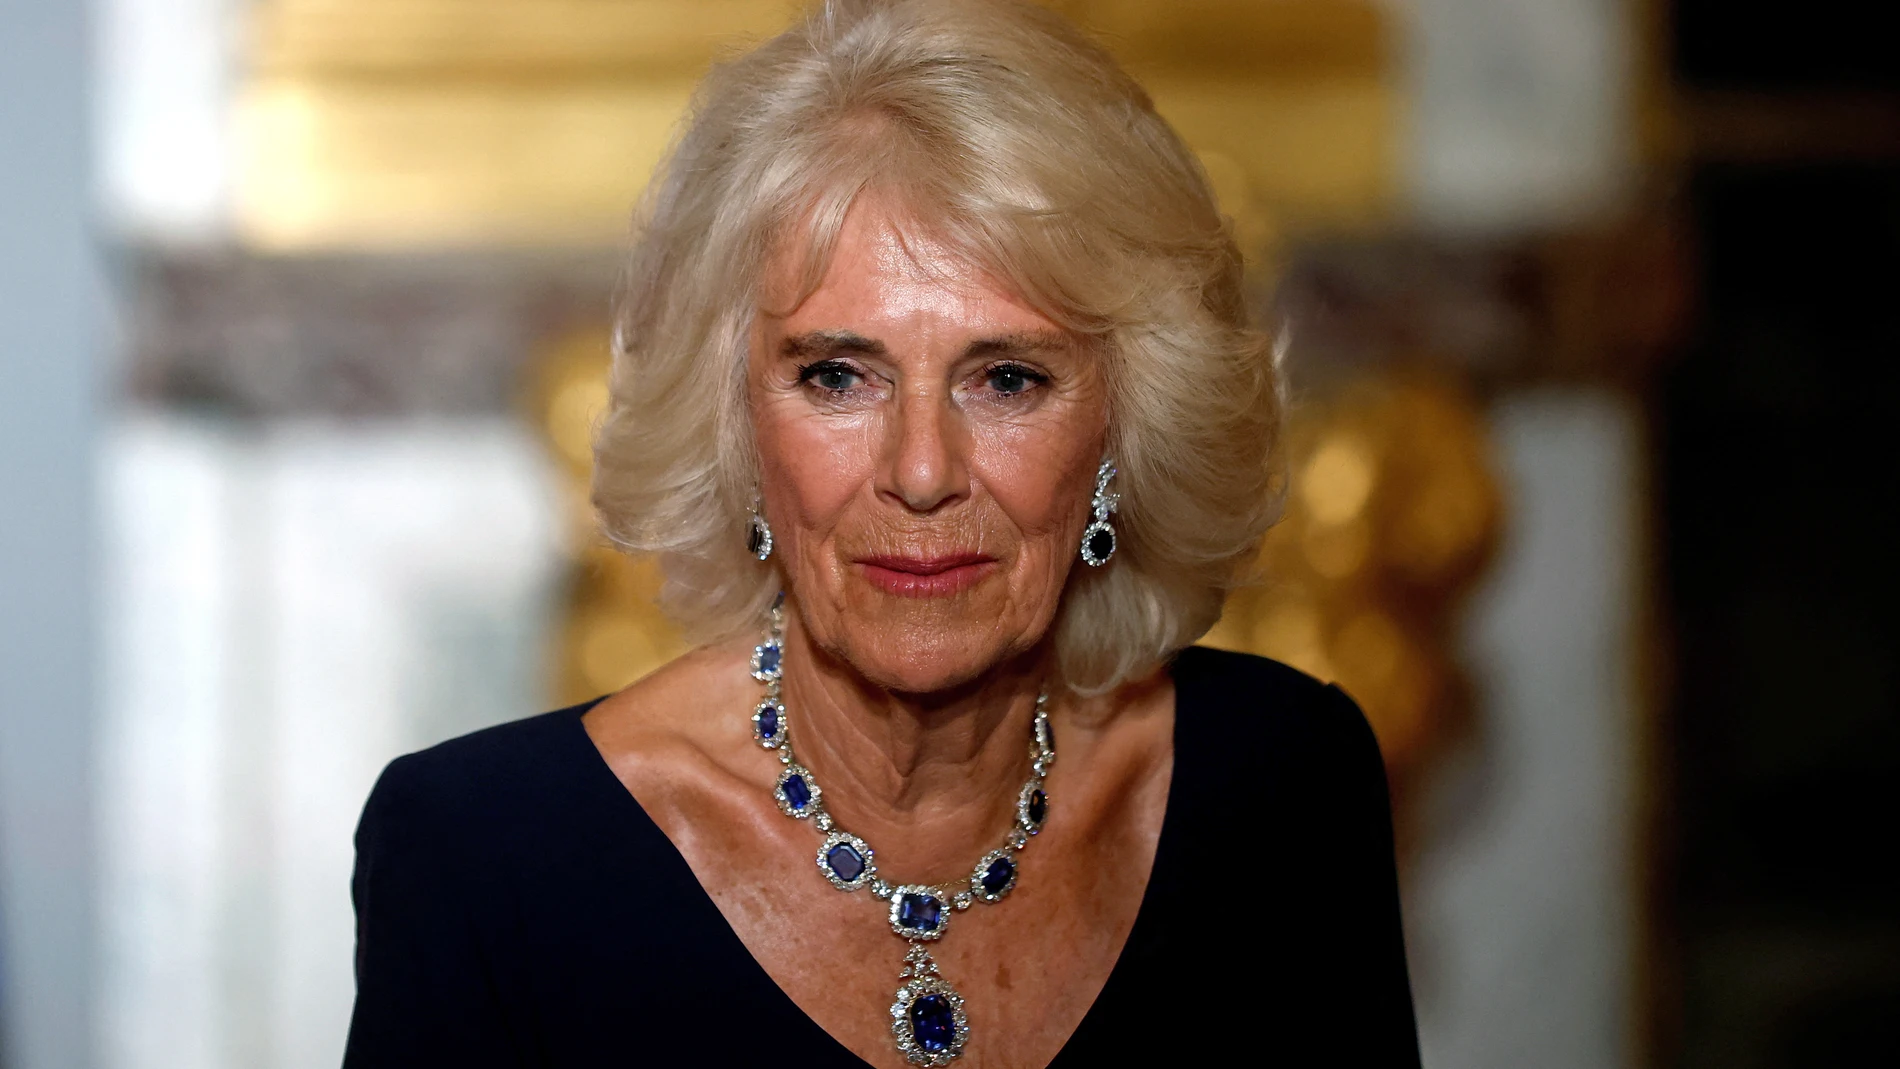 Versailles (France), 20/09/2023.- Britain's Queen Camilla attends a state dinner in the Hall of Mirrors at the Palace of Versailles, in Versailles, near Paris, France, 20 September 2023, on the first day of a state visit to the country. The British royal couple's three-day state visit was initially planned for March 2023 and postponed due to widespread demonstrations in France against the government's pension reforms. (Francia, Reino Unido) EFE/EPA/BENOIT TESSIER / POOL MAXPPP OUT 